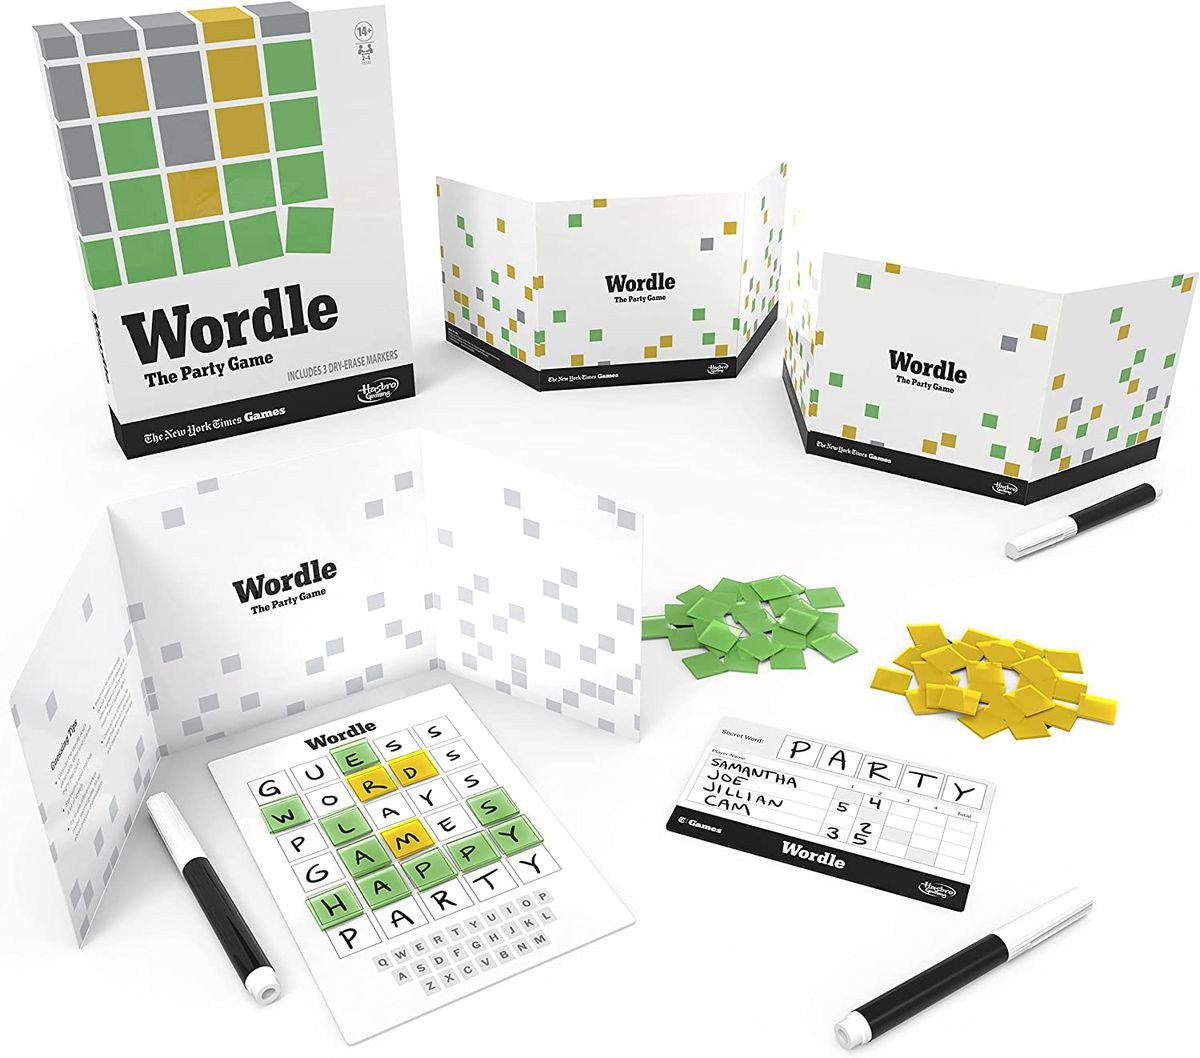 The components for Wordle: The Party Game include three shields, three play boards, three dry erase markers, and a collection of transparent green and yellow squares. There is also a box to hold them all.